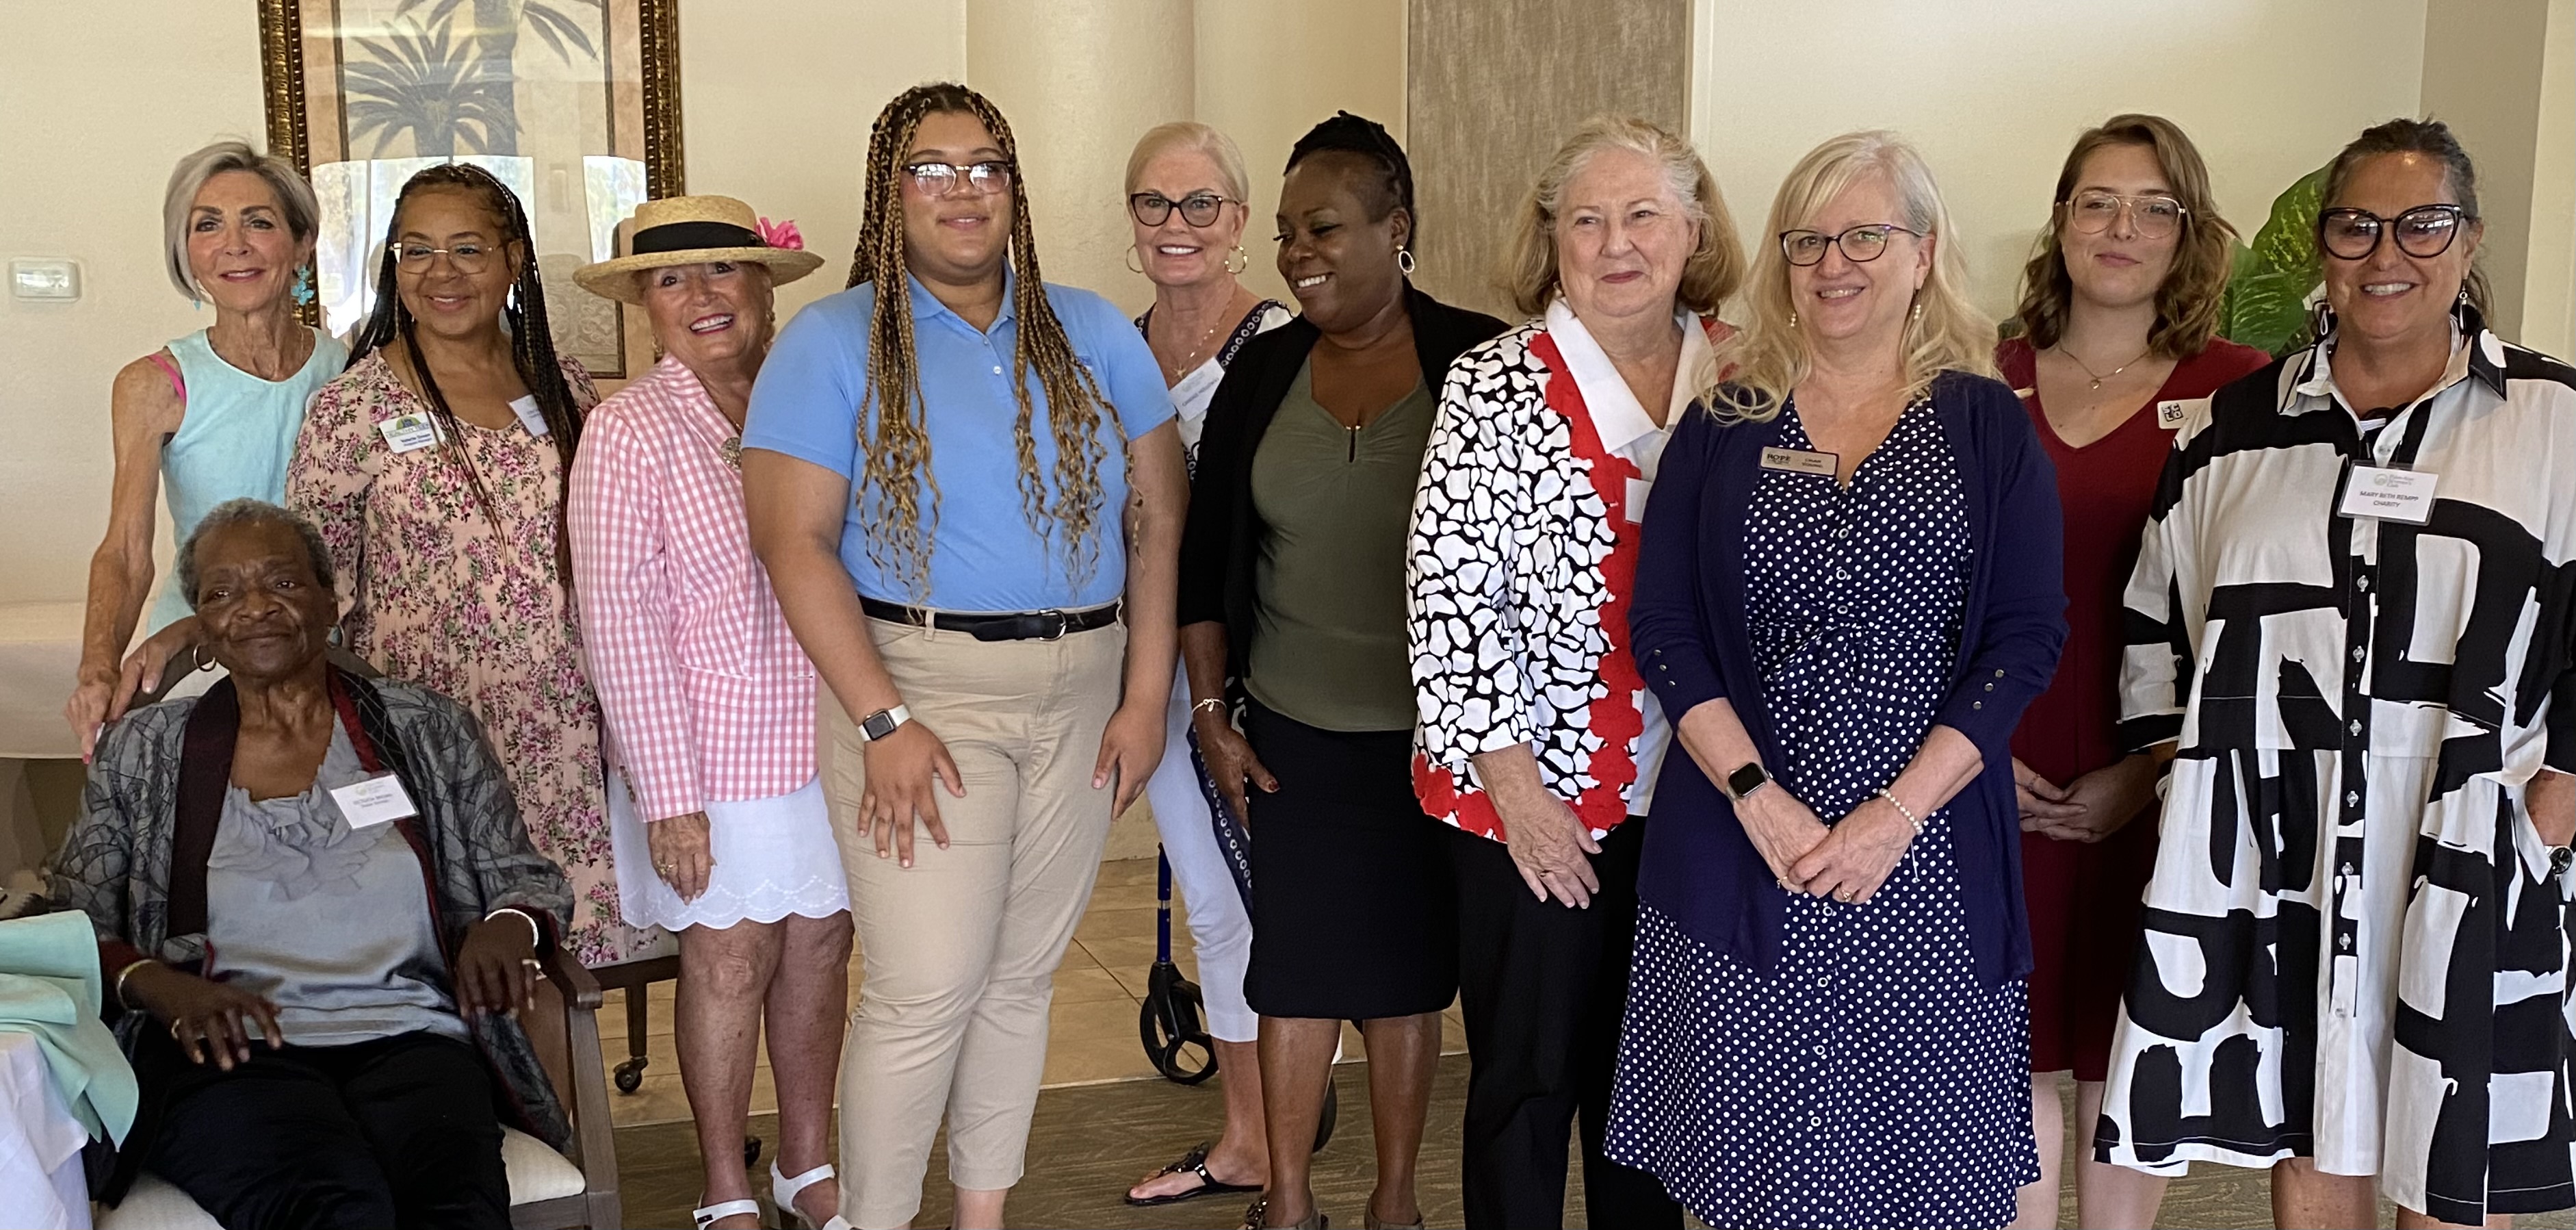 Rosemary McMullen, Victoria Brown, Valerie Green, Carolann Garafola, Erline Constant, Candace Holloway, April Glasco, Barbara Price, Char Young, Eryn McIntyre and Mary Beth Rempp at the Charity Luncheon.